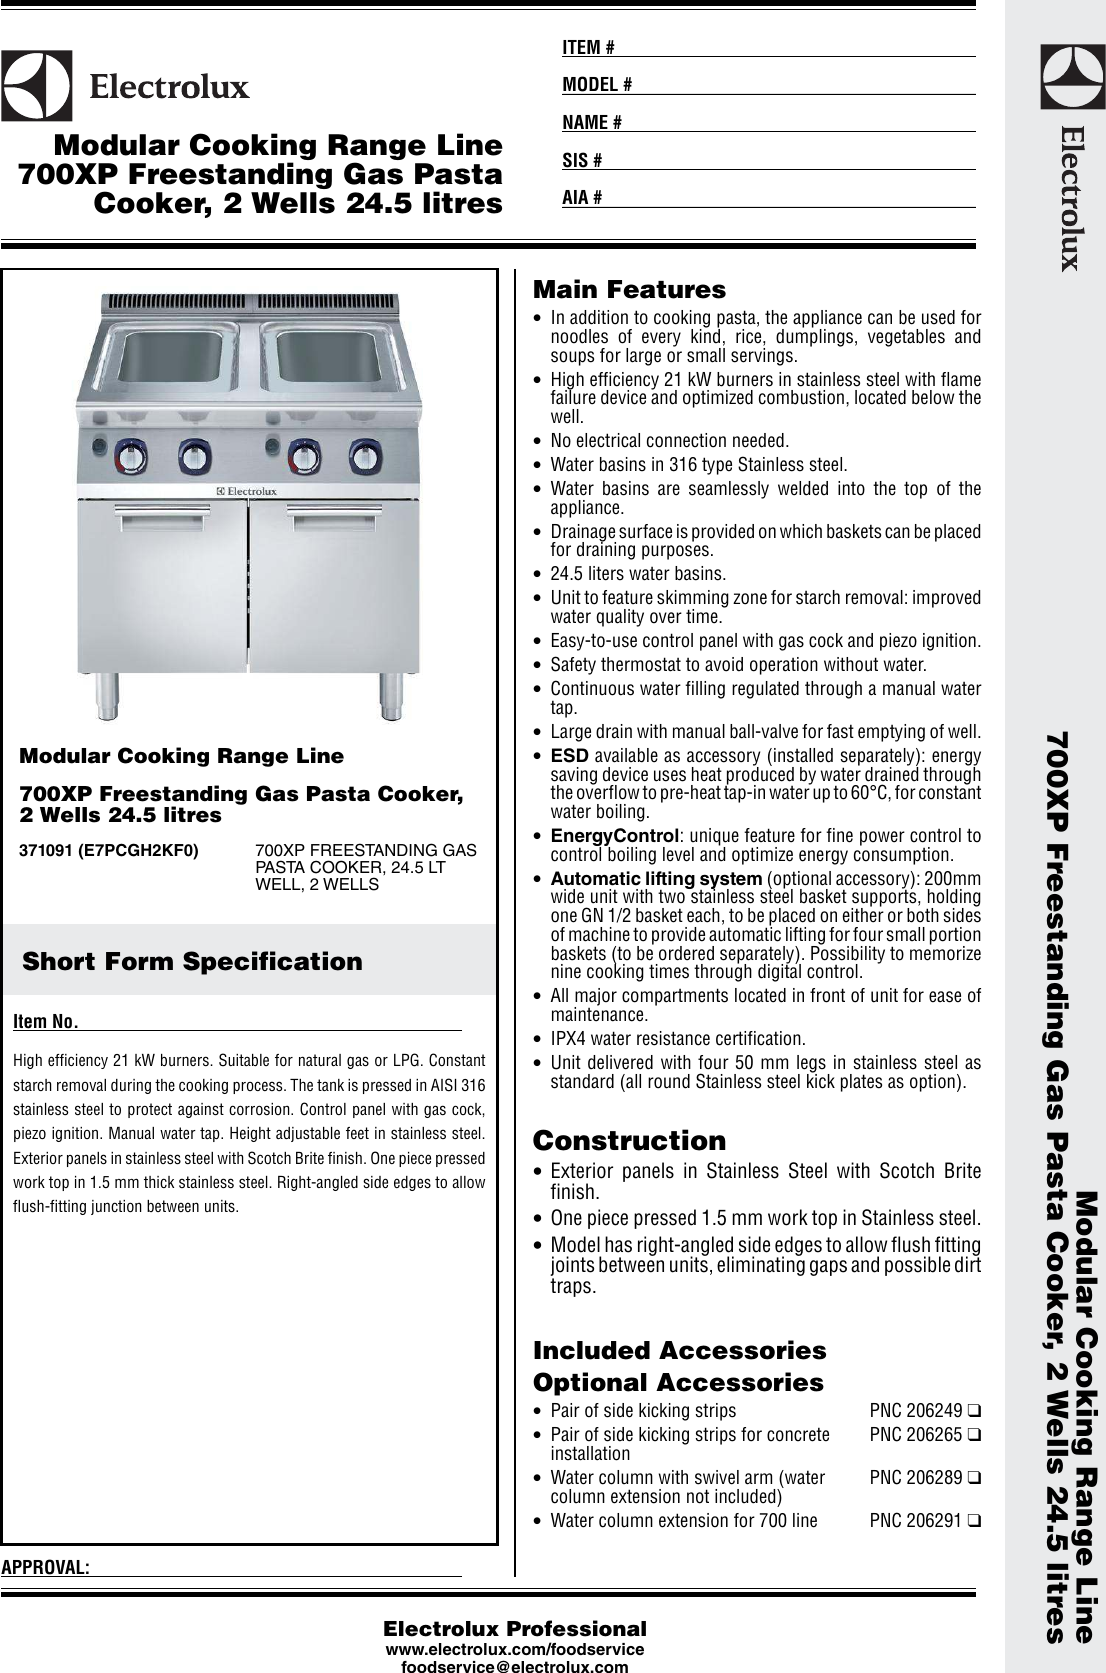 Page 1 of 3 - Electrolux Electrolux-Modular-Cooking-Range-700Xp-Users-Manual-  Electrolux-modular-cooking-range-700xp-users-manual